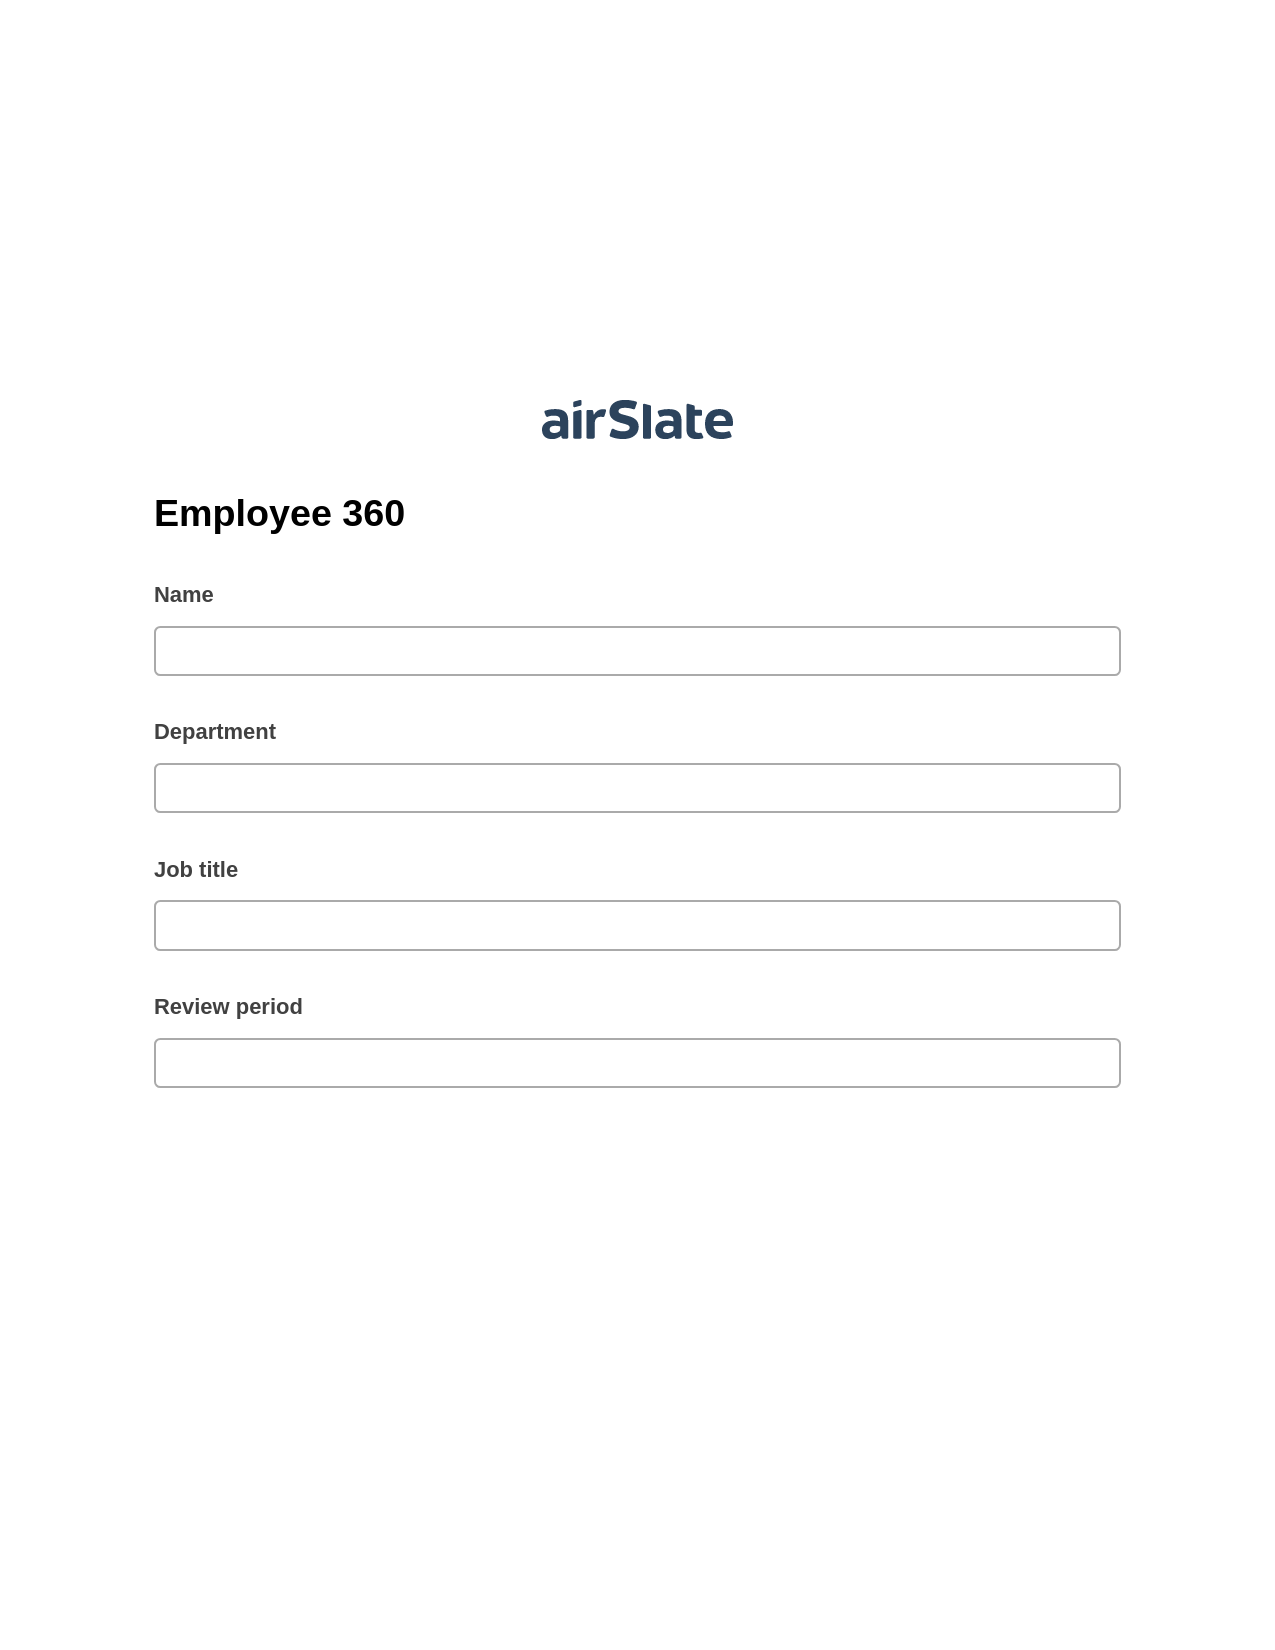 Multirole Employee 360 Pre-fill from MS Dynamics 365 Records, Remove Slate Bot, Post-finish Document Bot